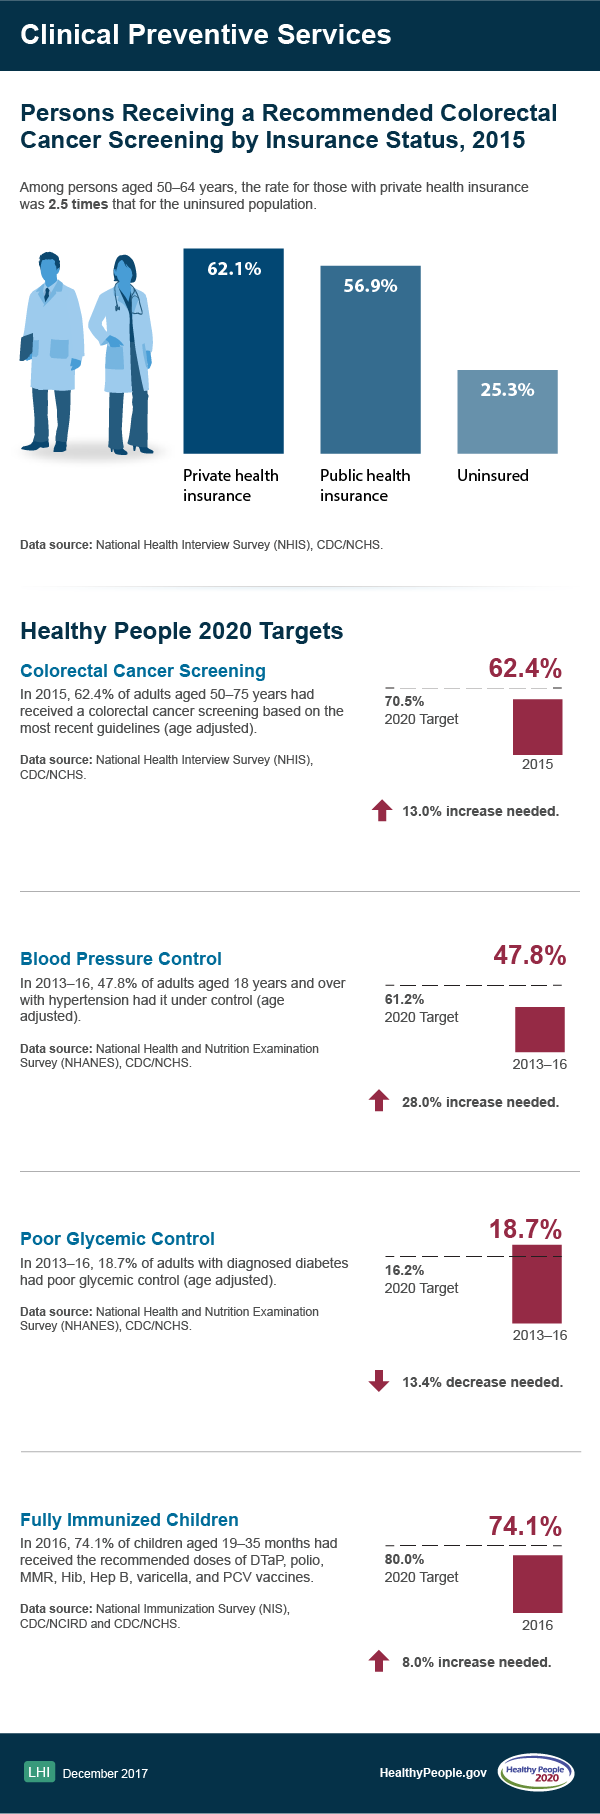 Infographic with data on clinical preventive services